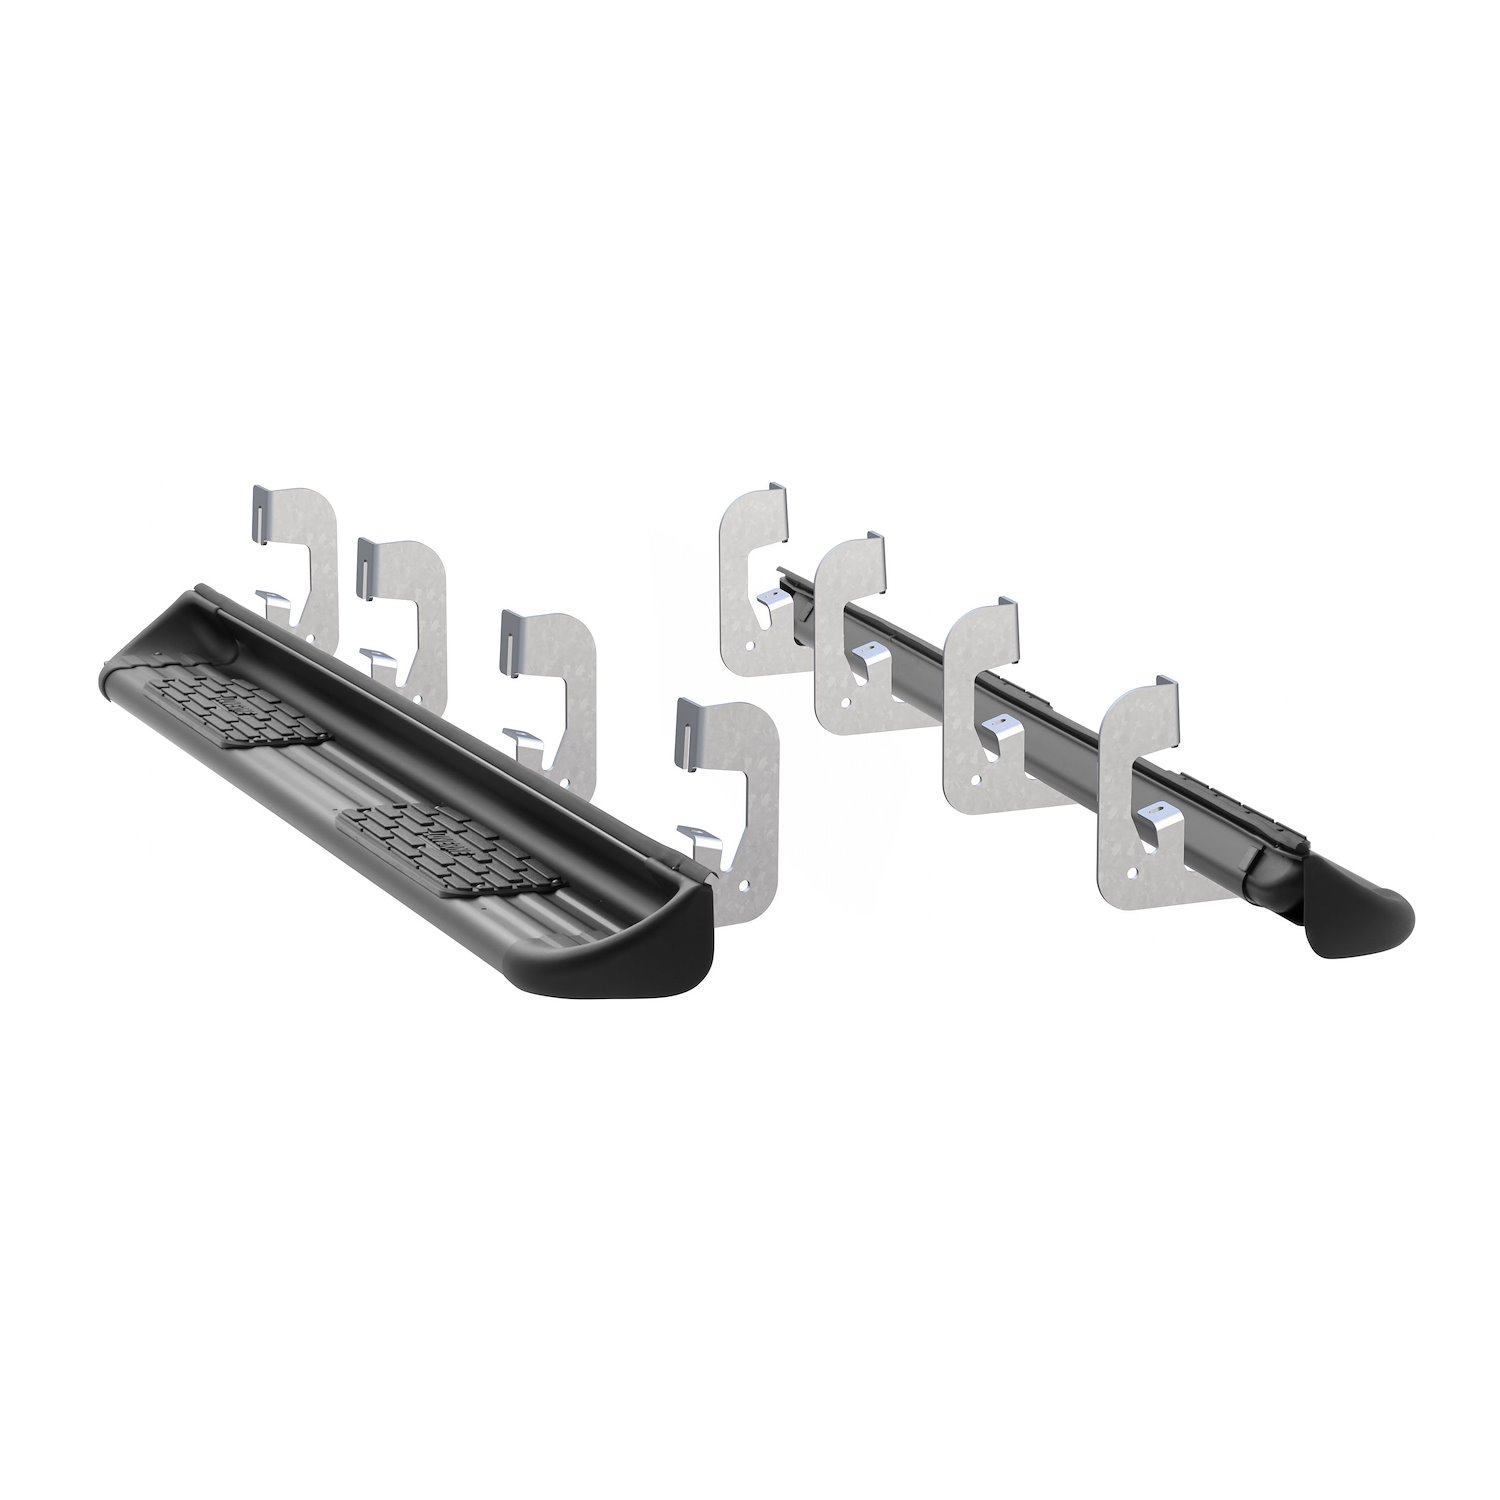 280743-581443 Black Stainless Steel Side Entry Steps Fits Select Chevy Silverado, GMC Sierra Crew Cab